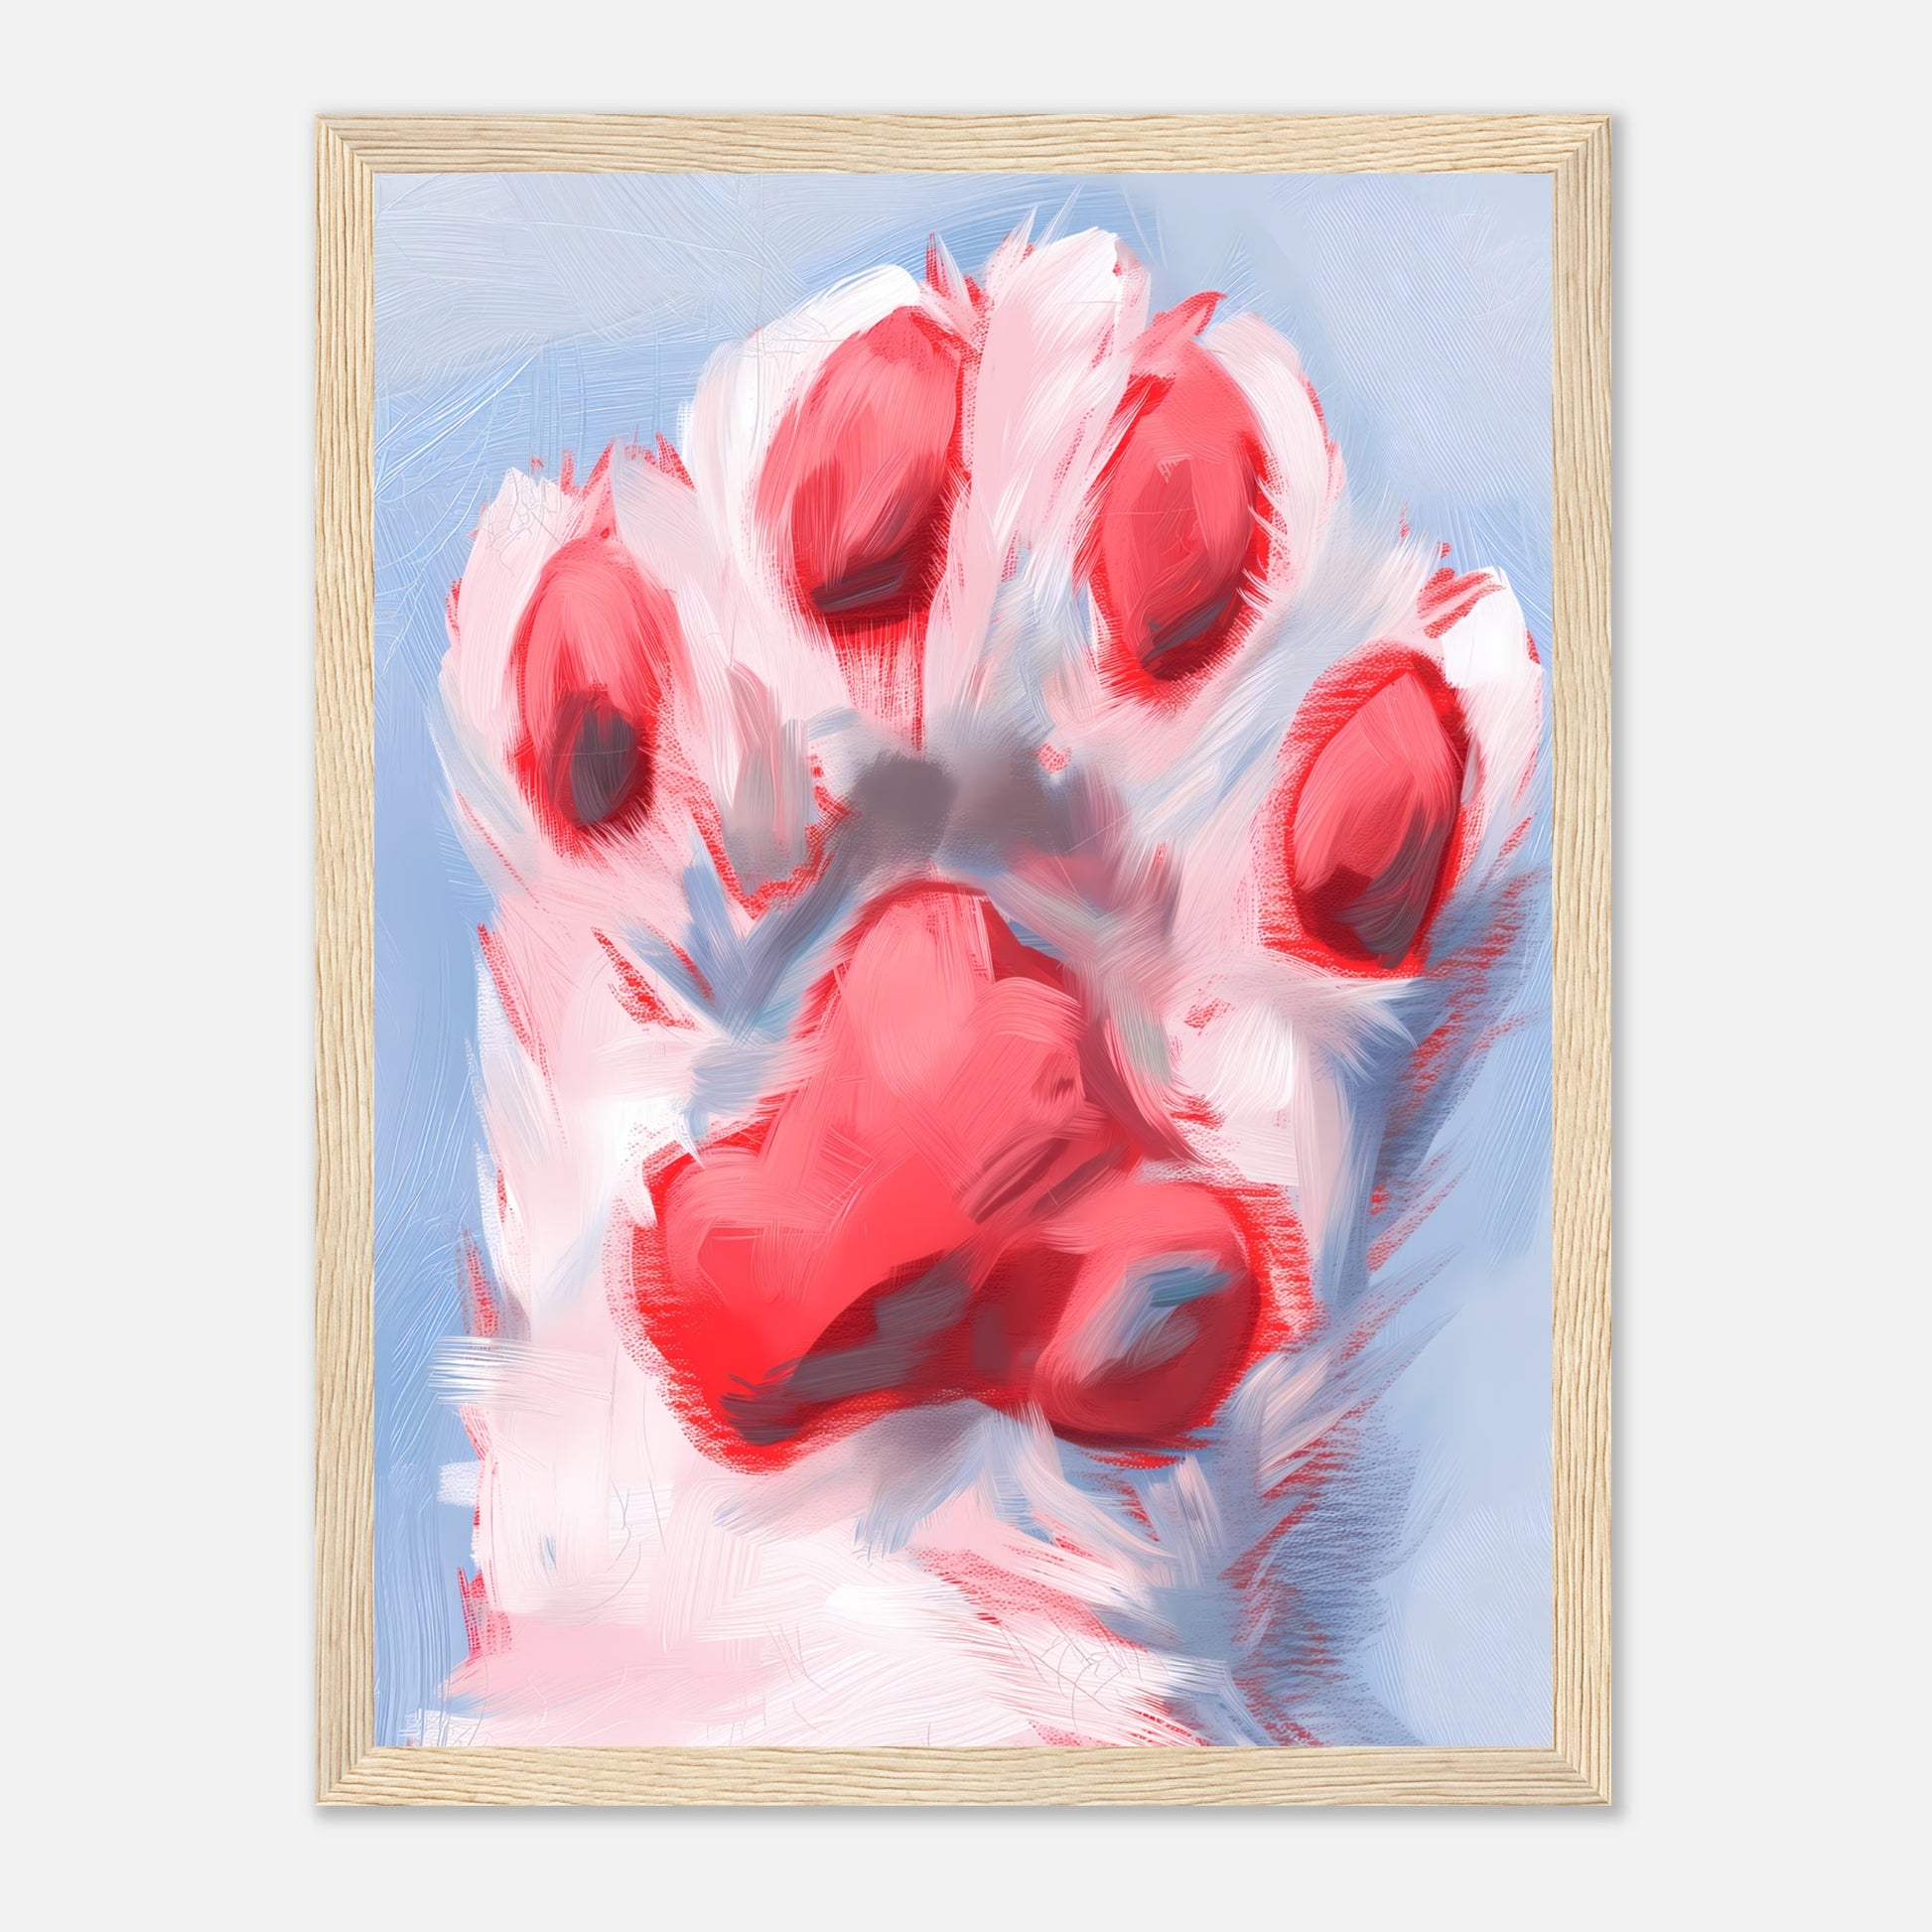 A framed abstract painting of a cat's paw in red and white tones.